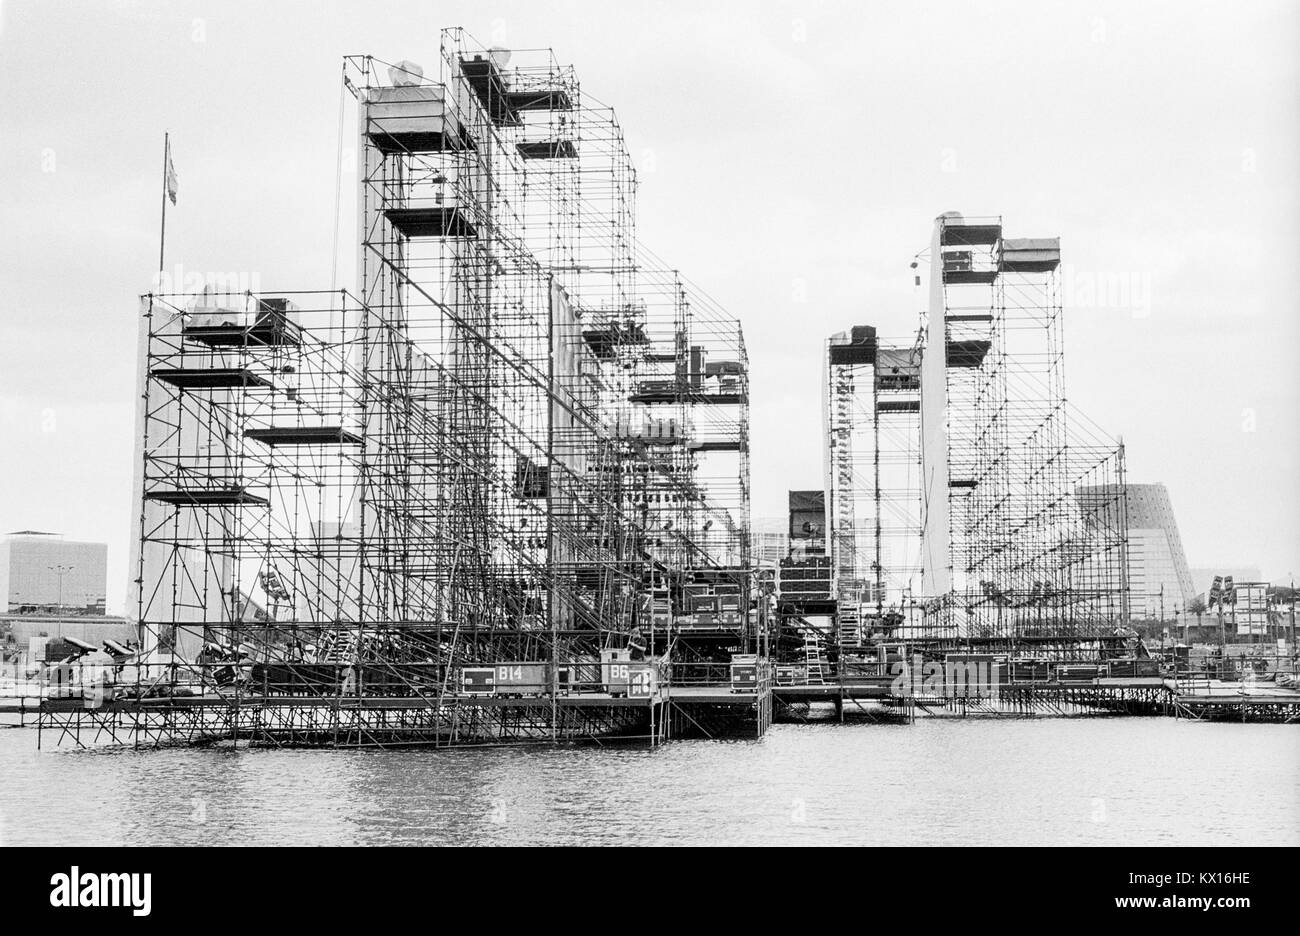 Stage building for Jean Michel Jarre concert Europe in Concert tour, Seville, staging by Edwin Shirely Staging constructed in the lake at the Seville Expo center, Lago de la Cartuja, Spain, 1st/2nd October 1993 Stock Photo